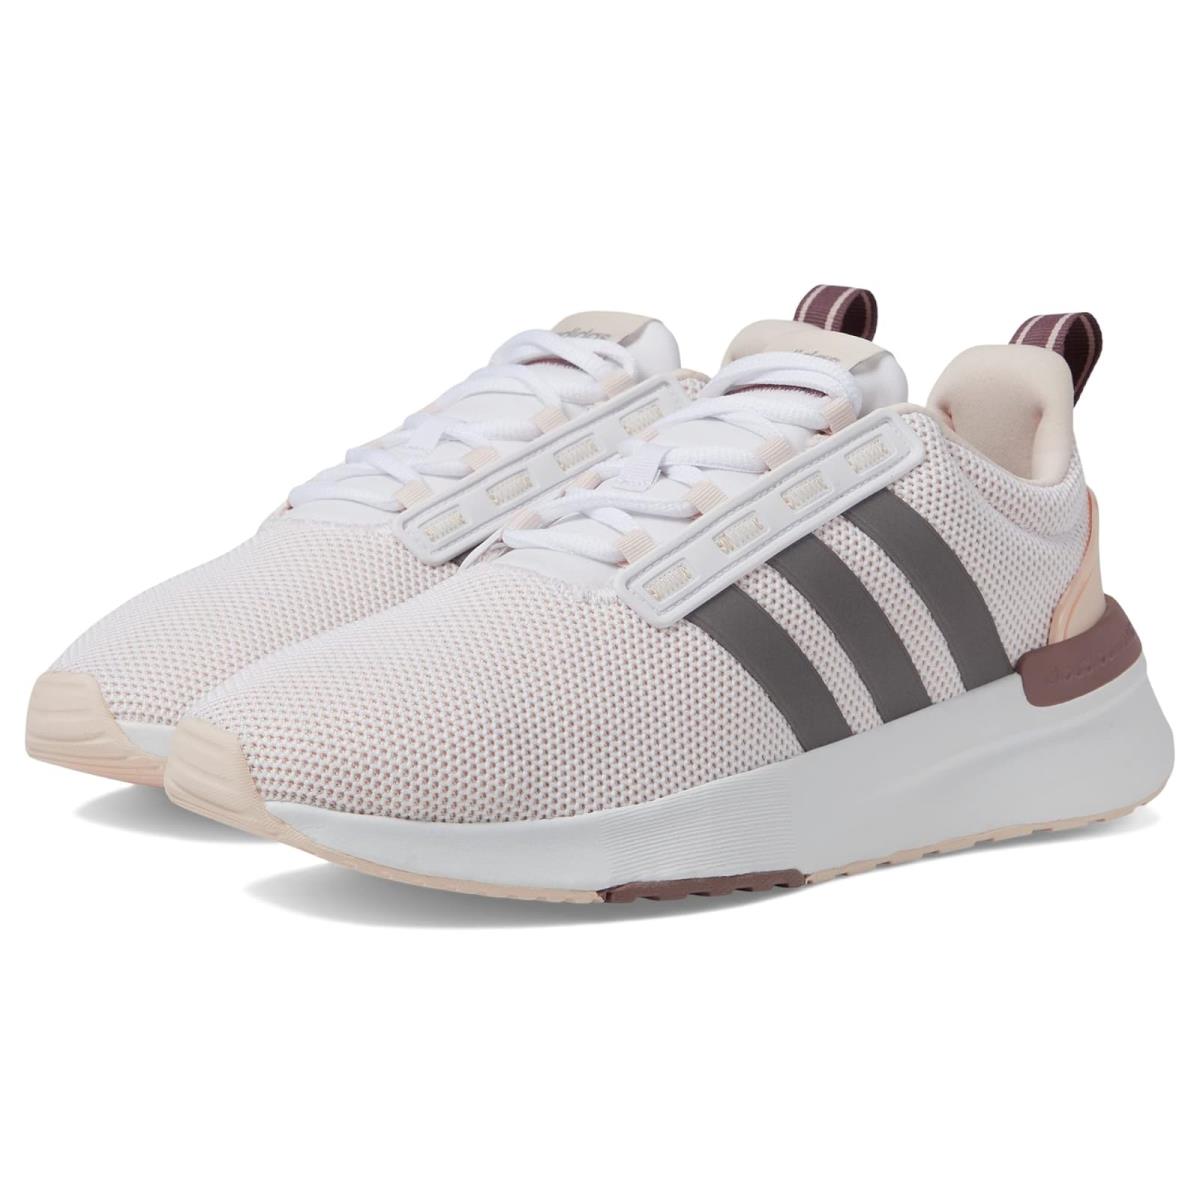 Woman`s Sneakers Athletic Shoes Adidas Running Racer TR21 White/Taupe Metallic